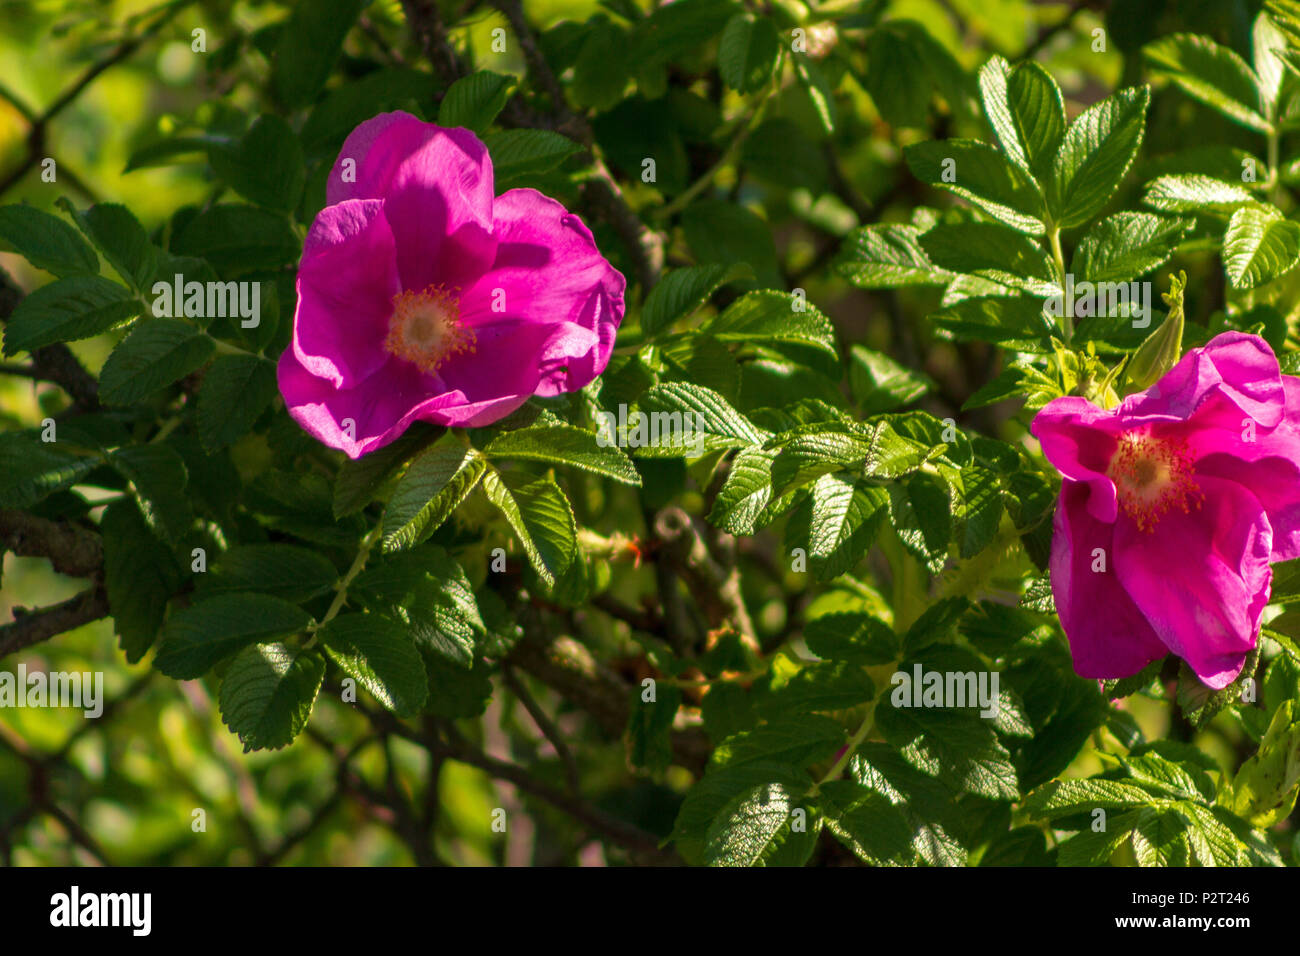 Blossoms of a rugosa rose stand out amid the green foliage. Stock Photo